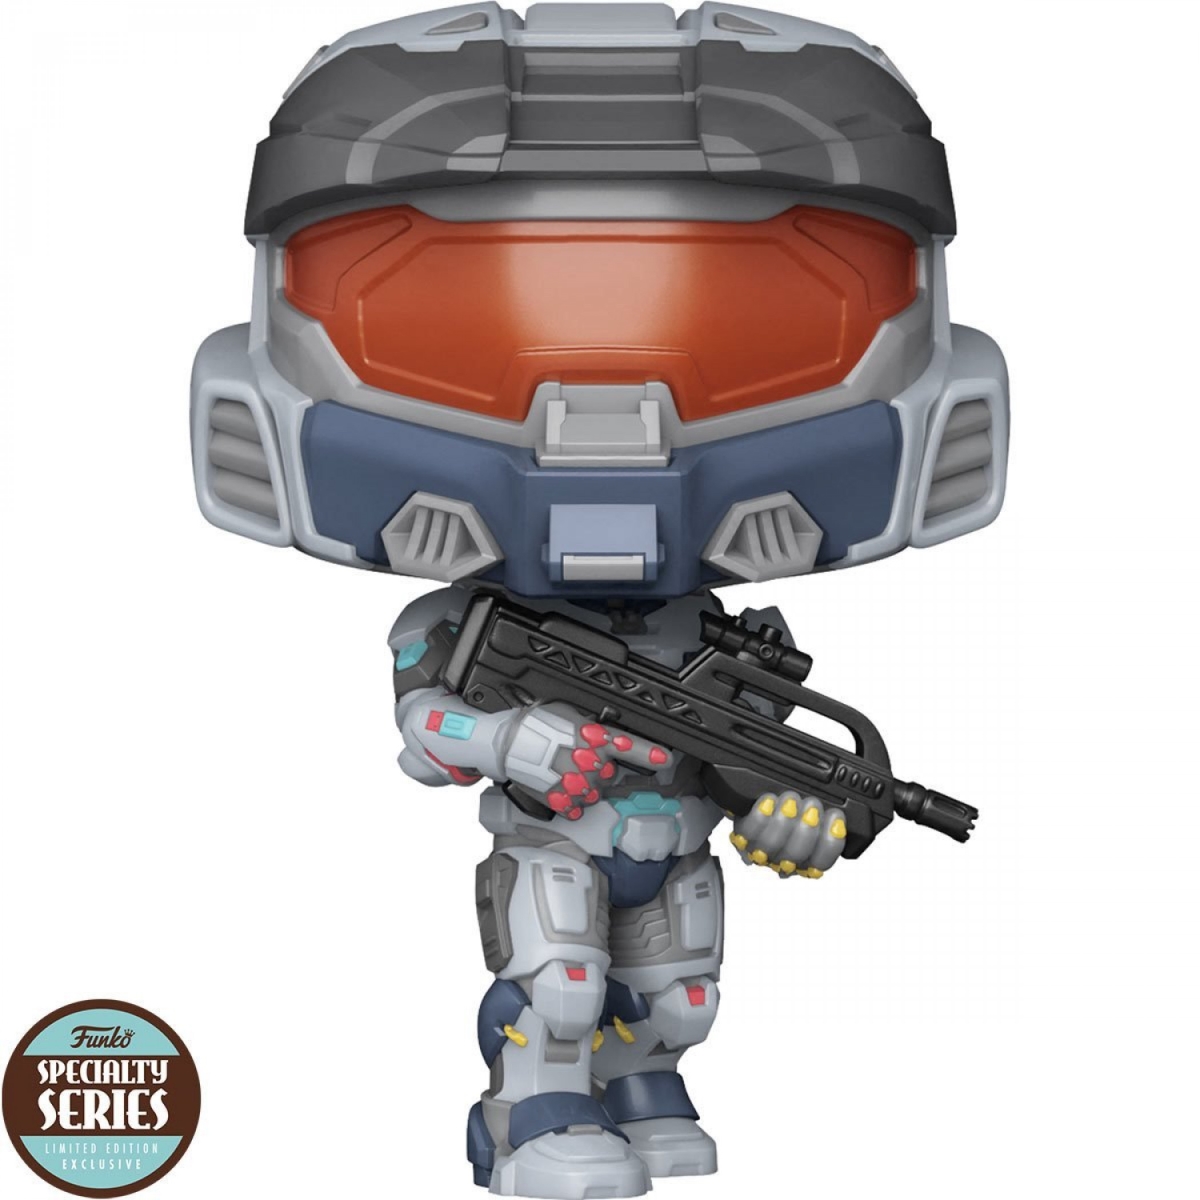 Picture of Halo 834688 Halo Infinite Mark VII with Weapon Specialty Series Funko Pop Vinyl Figure